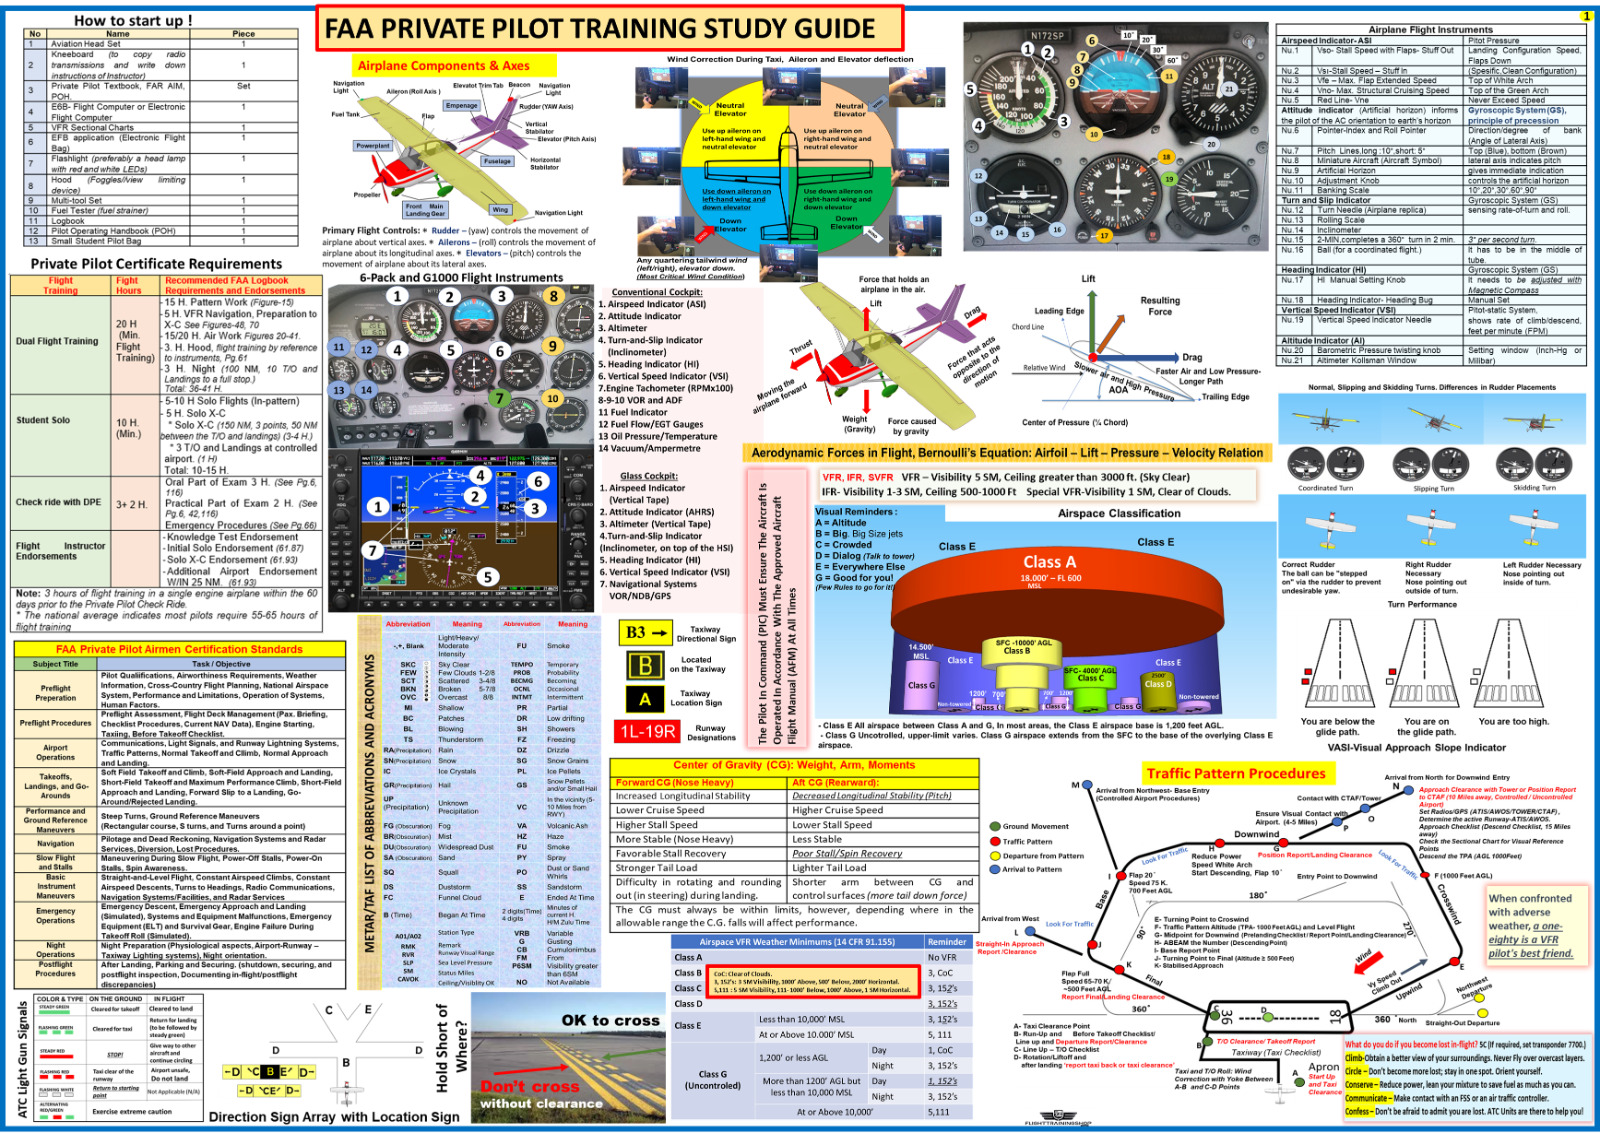 FAA Private Pilot Training Study Guide. (Poster, Size 27 x 19 In), ALL IN ONE